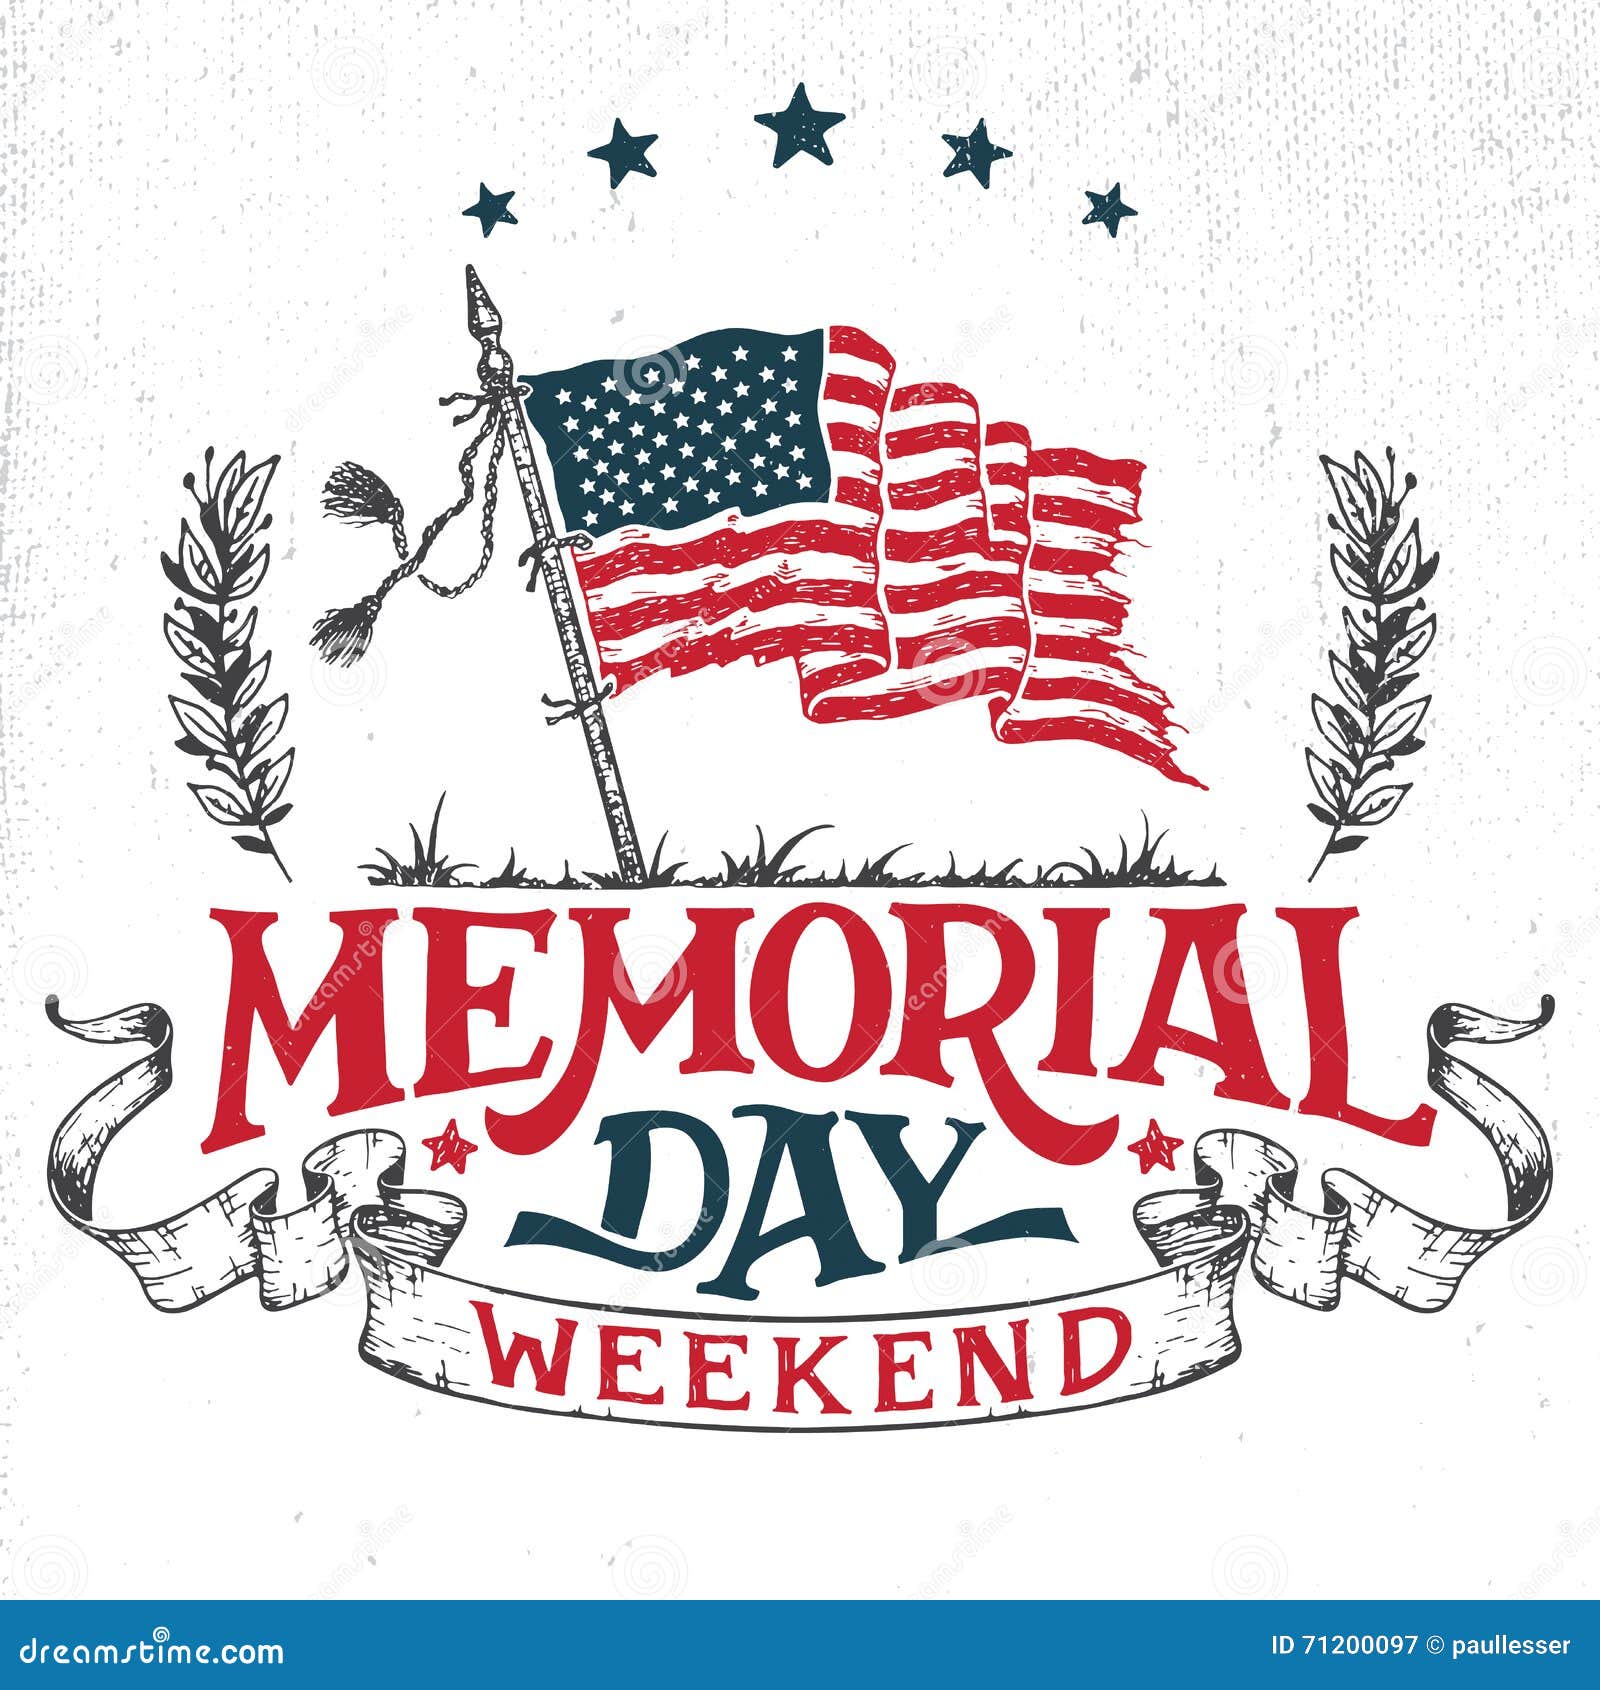 Image result for memorial day weekend images